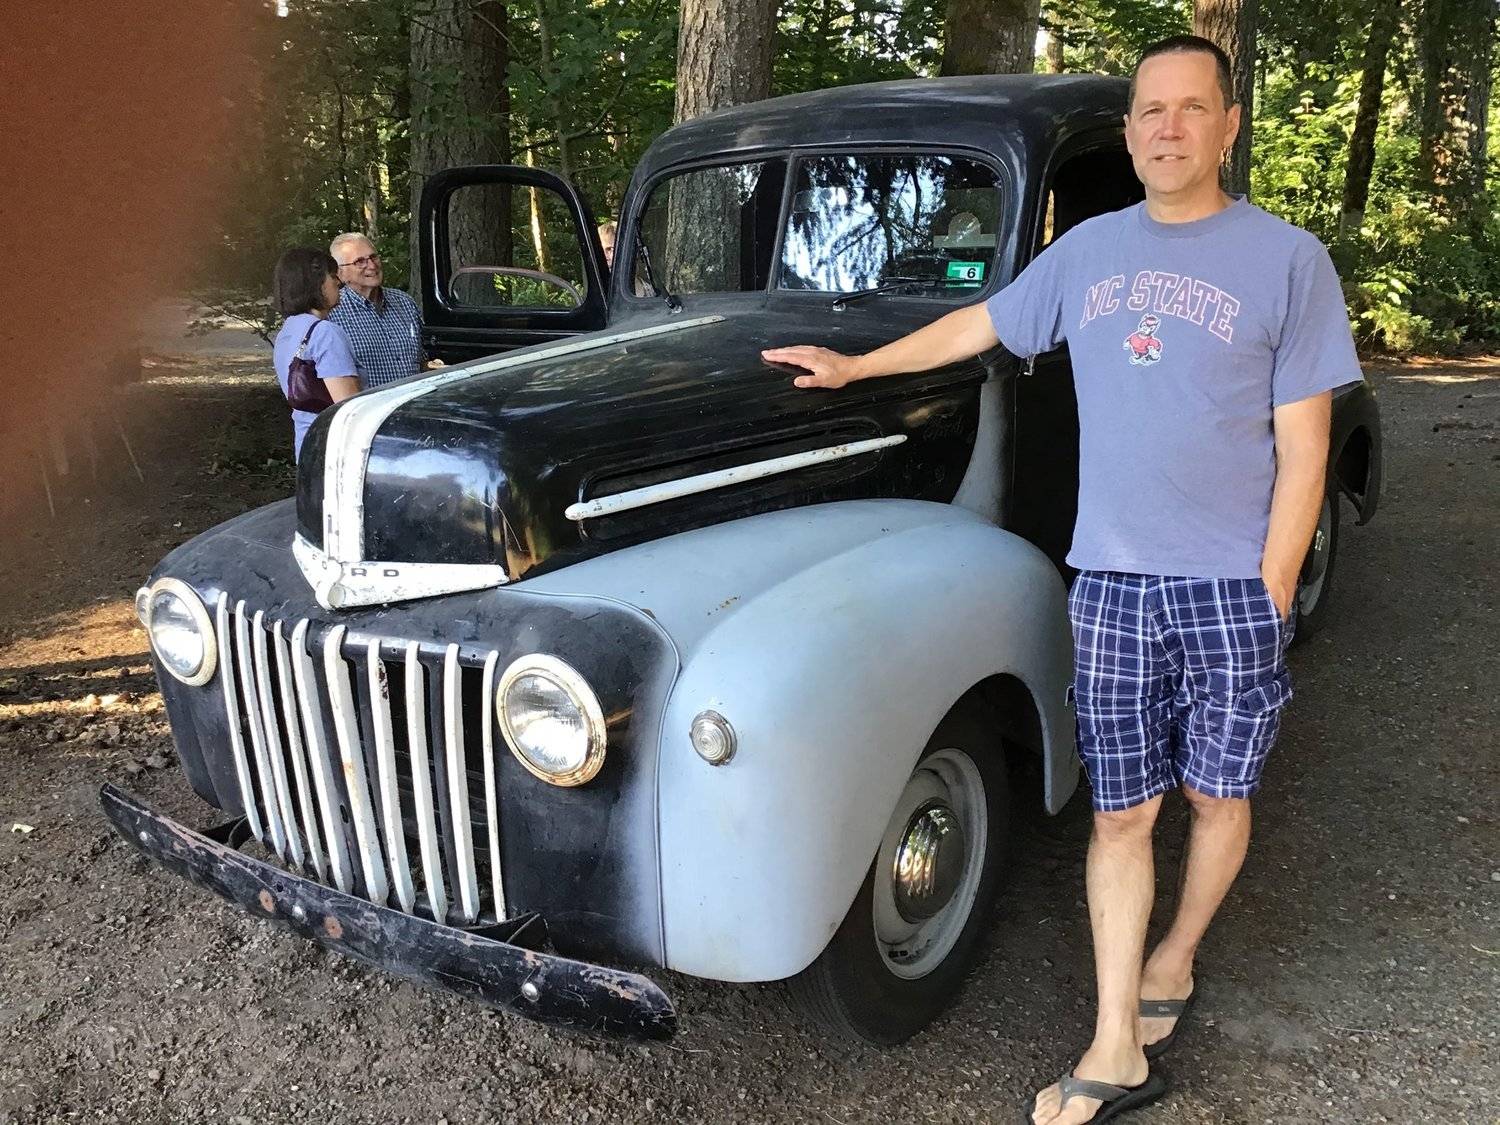 Dave Elson stands with his truck, a 1942 Ford. The body design of the Ford Truck model was revamped after World War II in 1947.